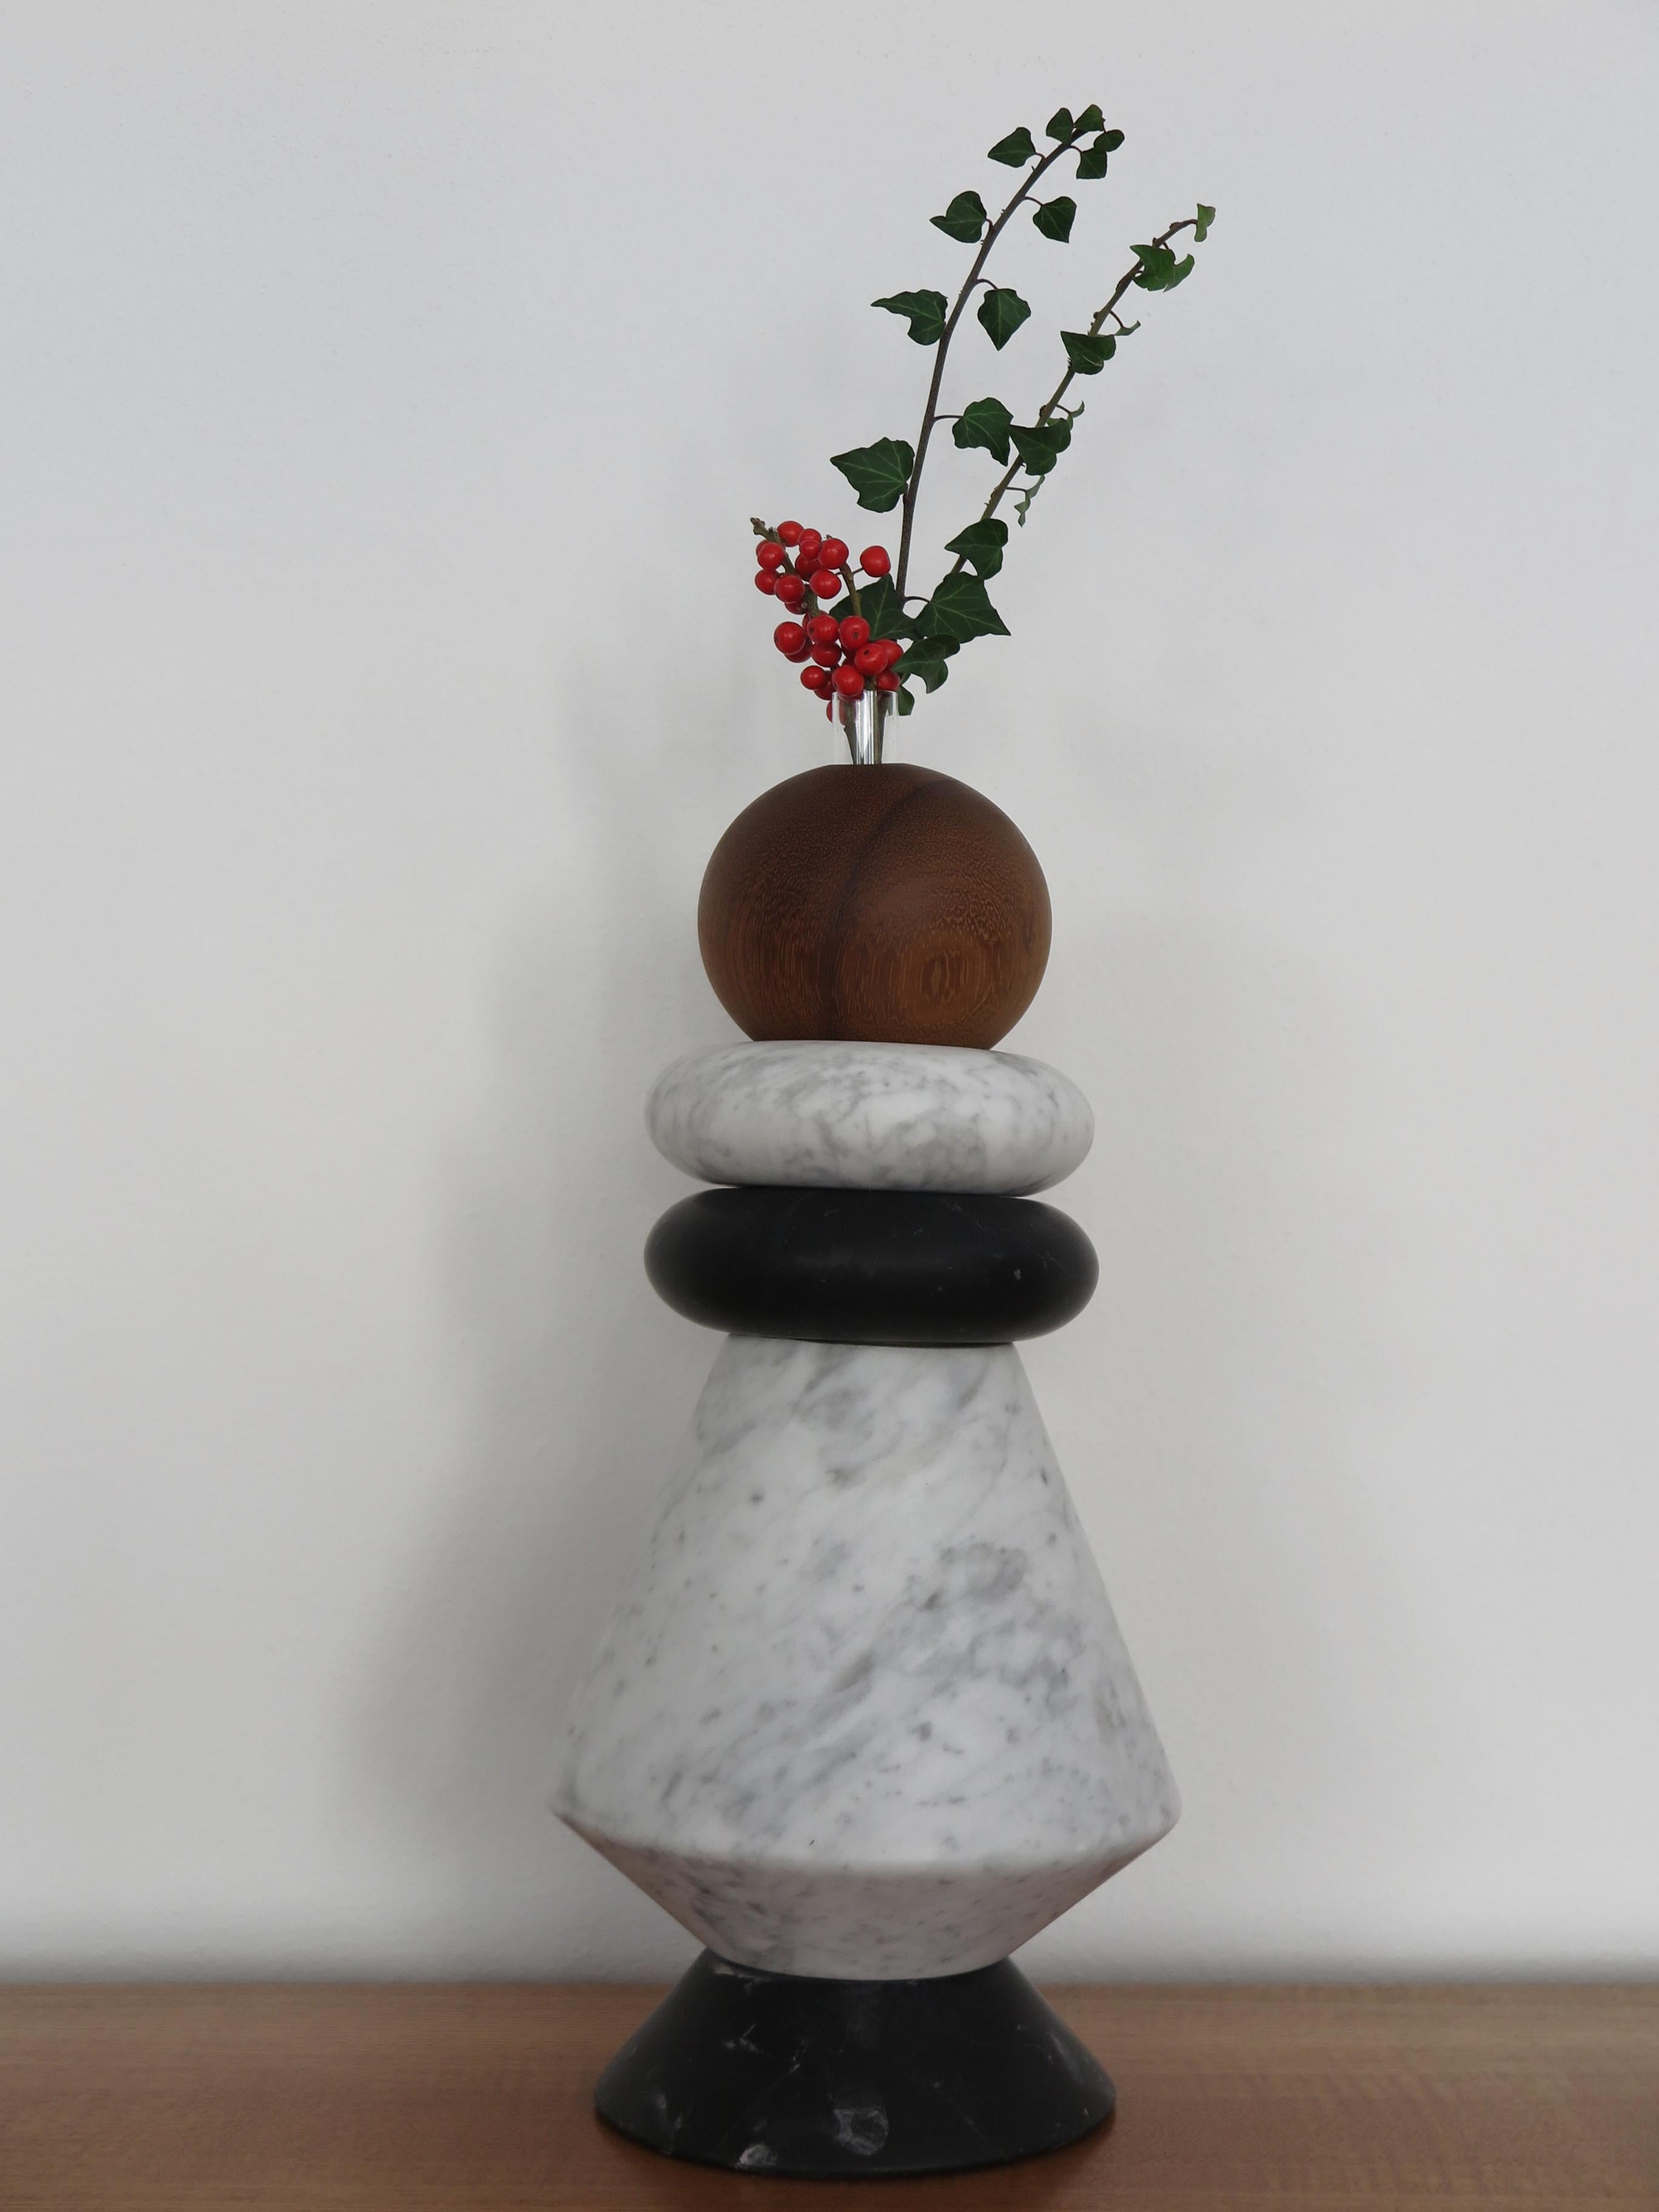 Italian contemporary sculpture, candle holder and flower vase, modular as you like made up of white marble Carrara, Black marble, and solid wood with including two glass vases for fresh flowers.
The various elements can be composed and stacked as